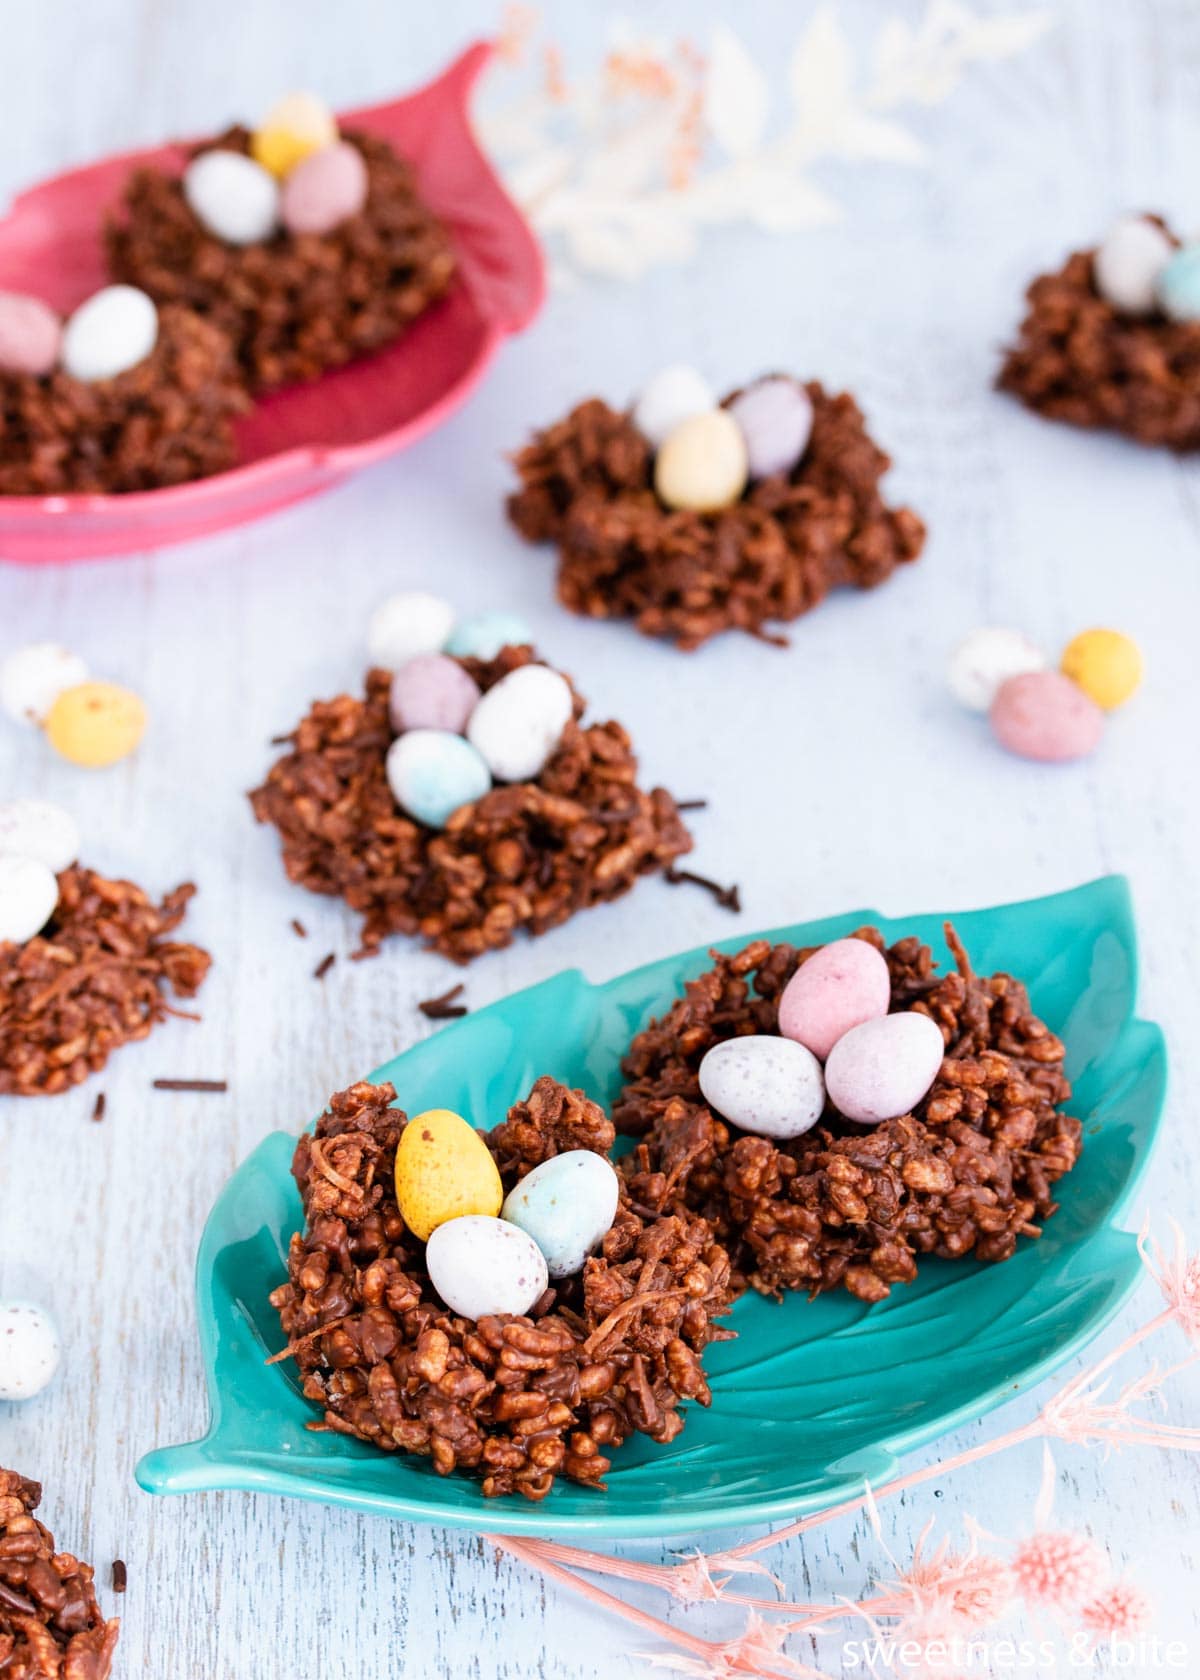 Chocolate Easter nests filled with pastel mini eggs, on a teal green leaf-shaped plate.